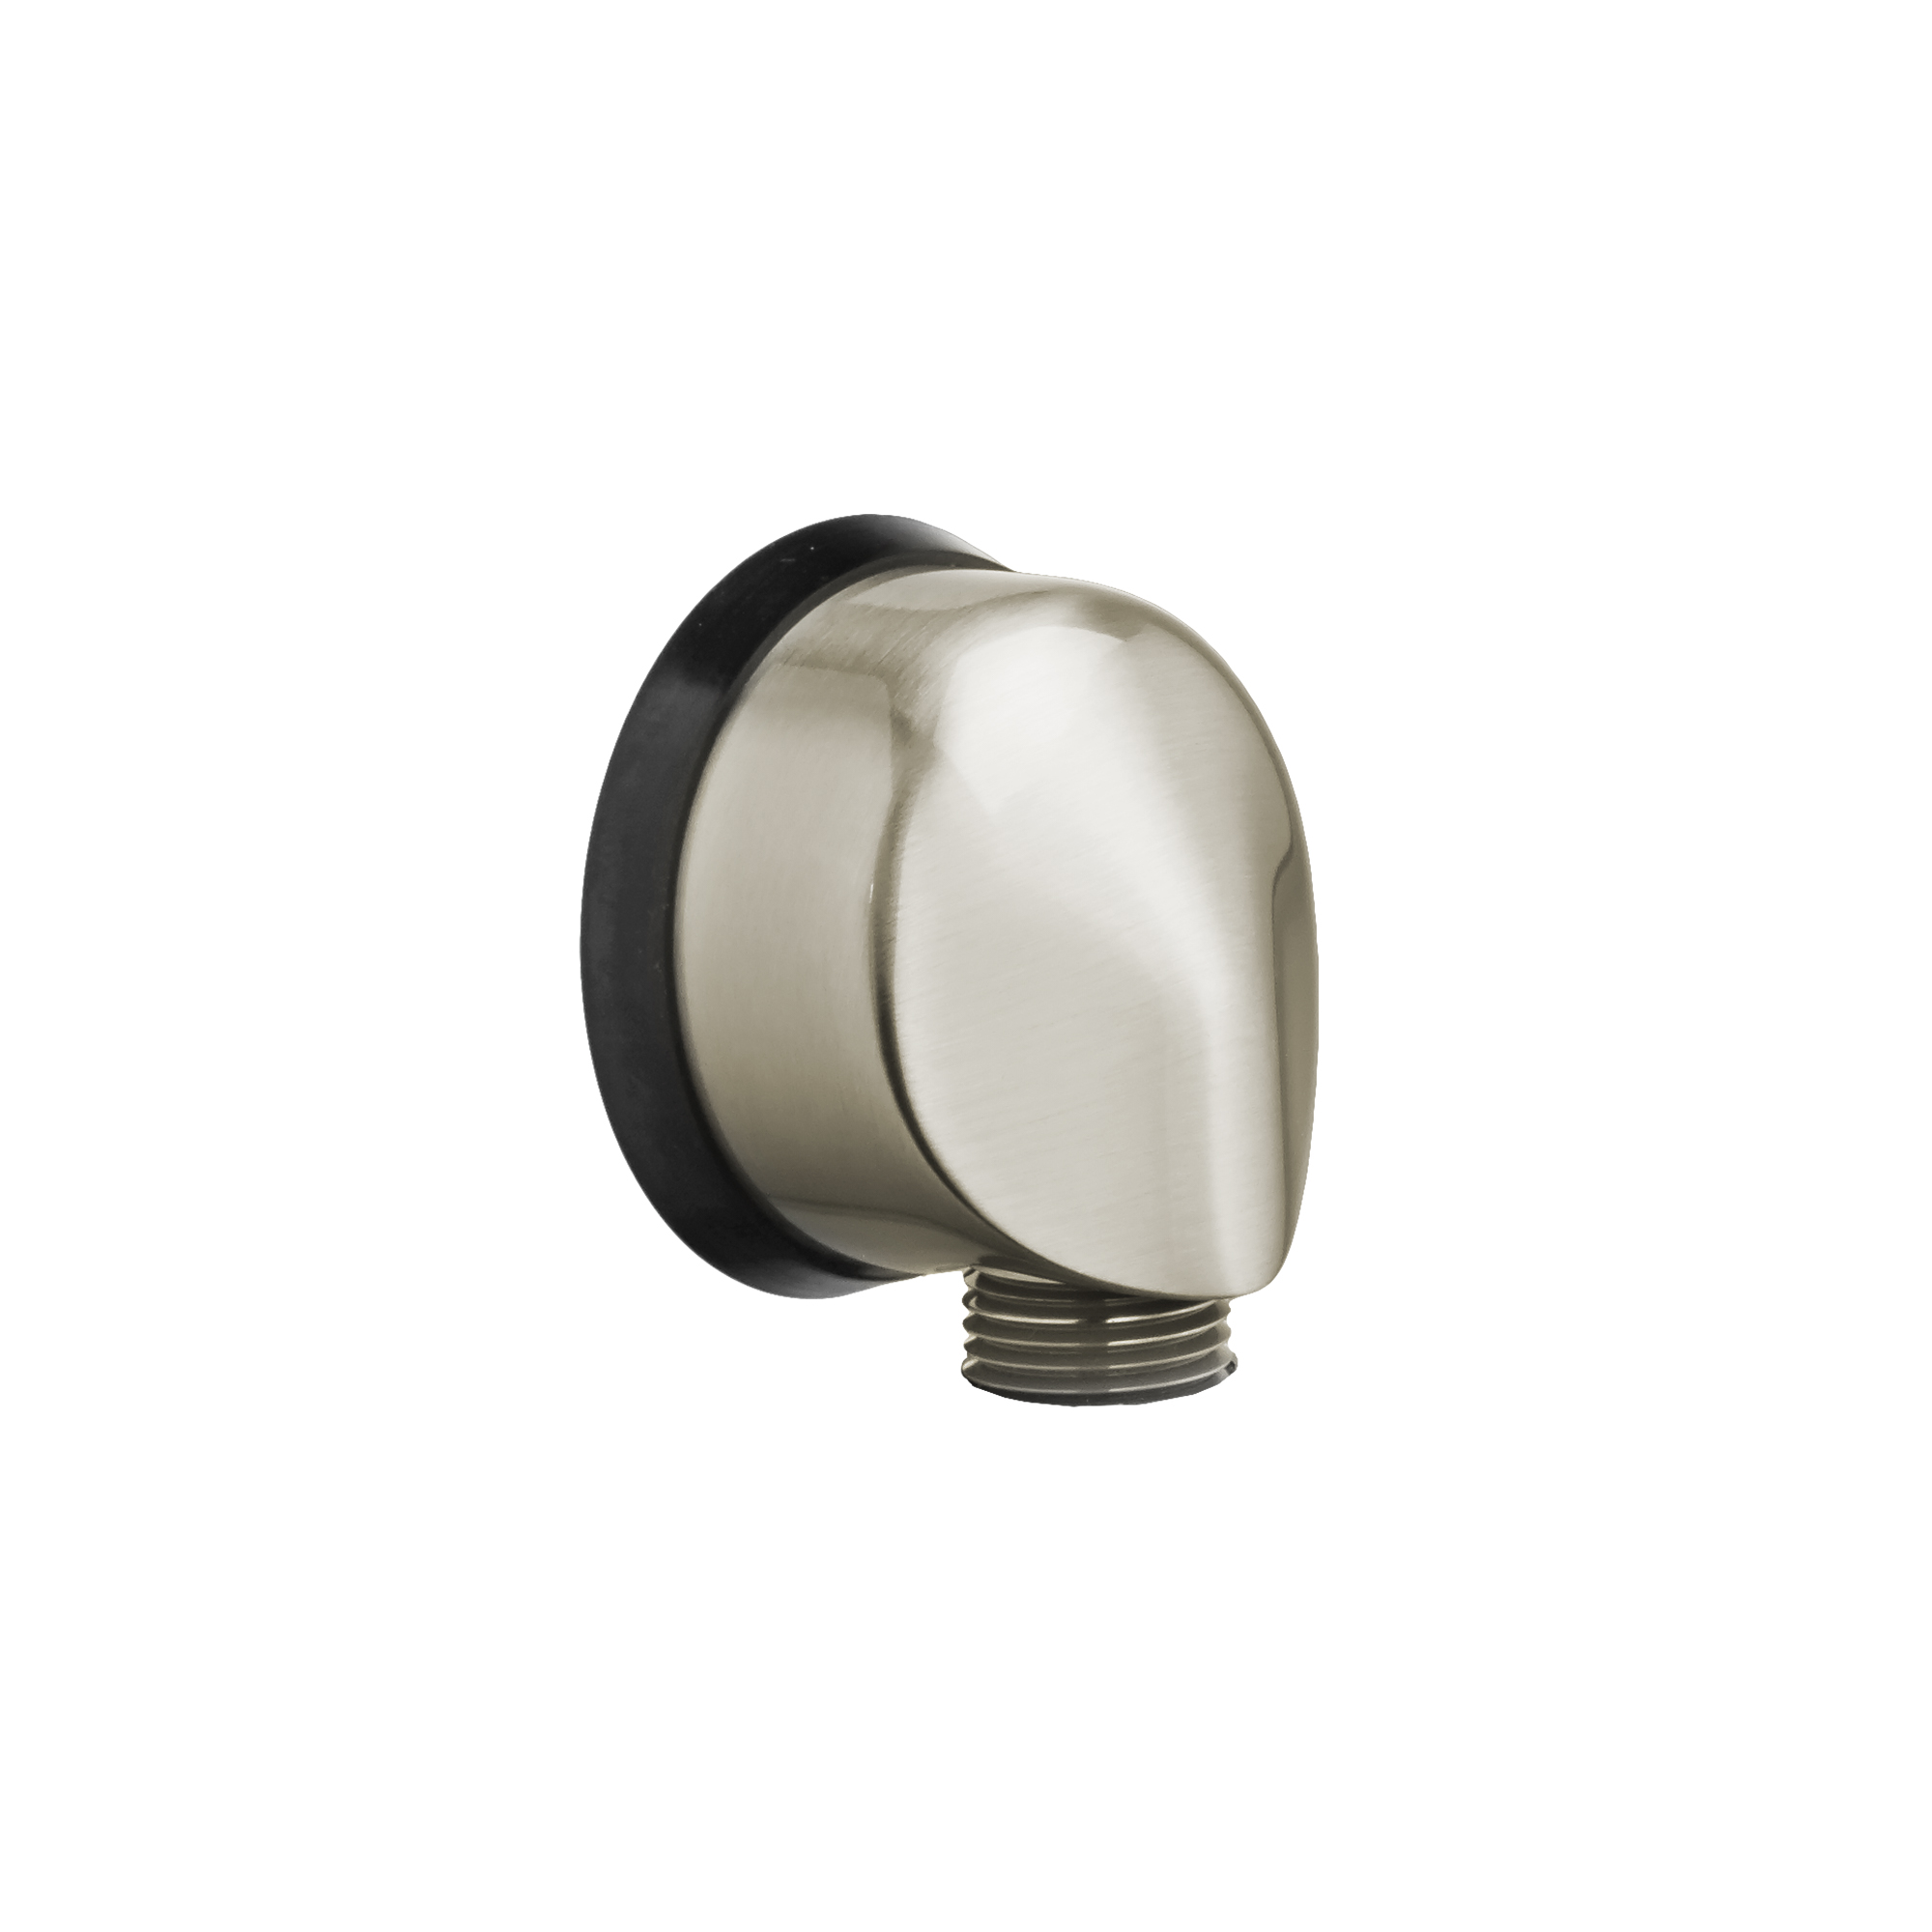 Round Wall Elbow for Hand Shower